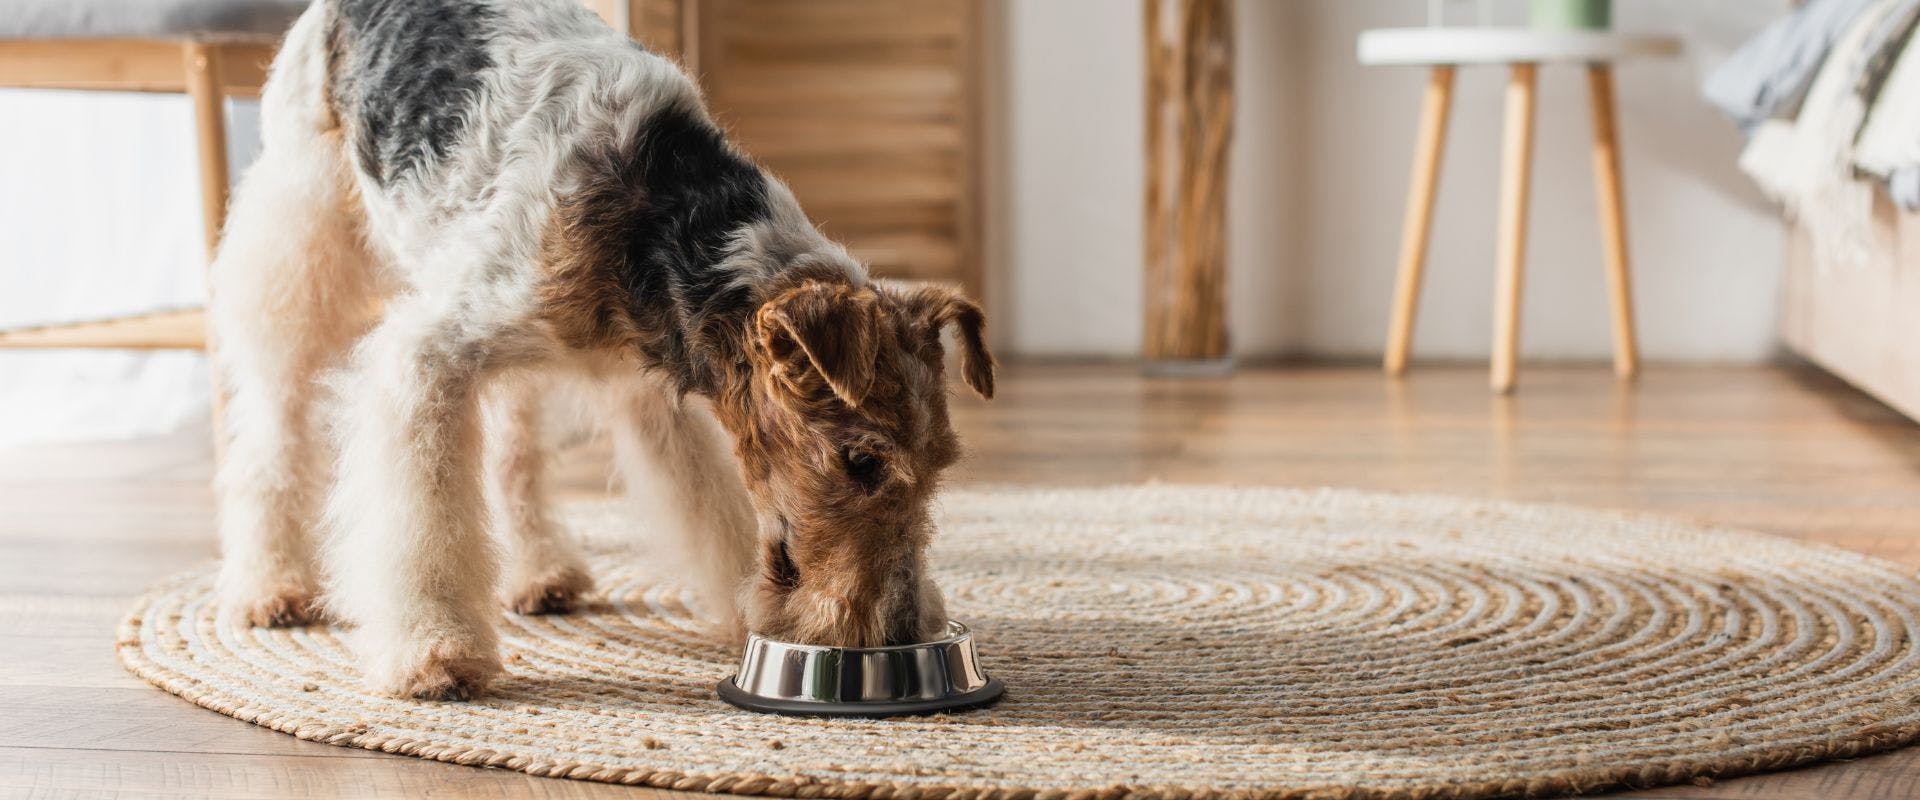 Dog eating from a metal bowl